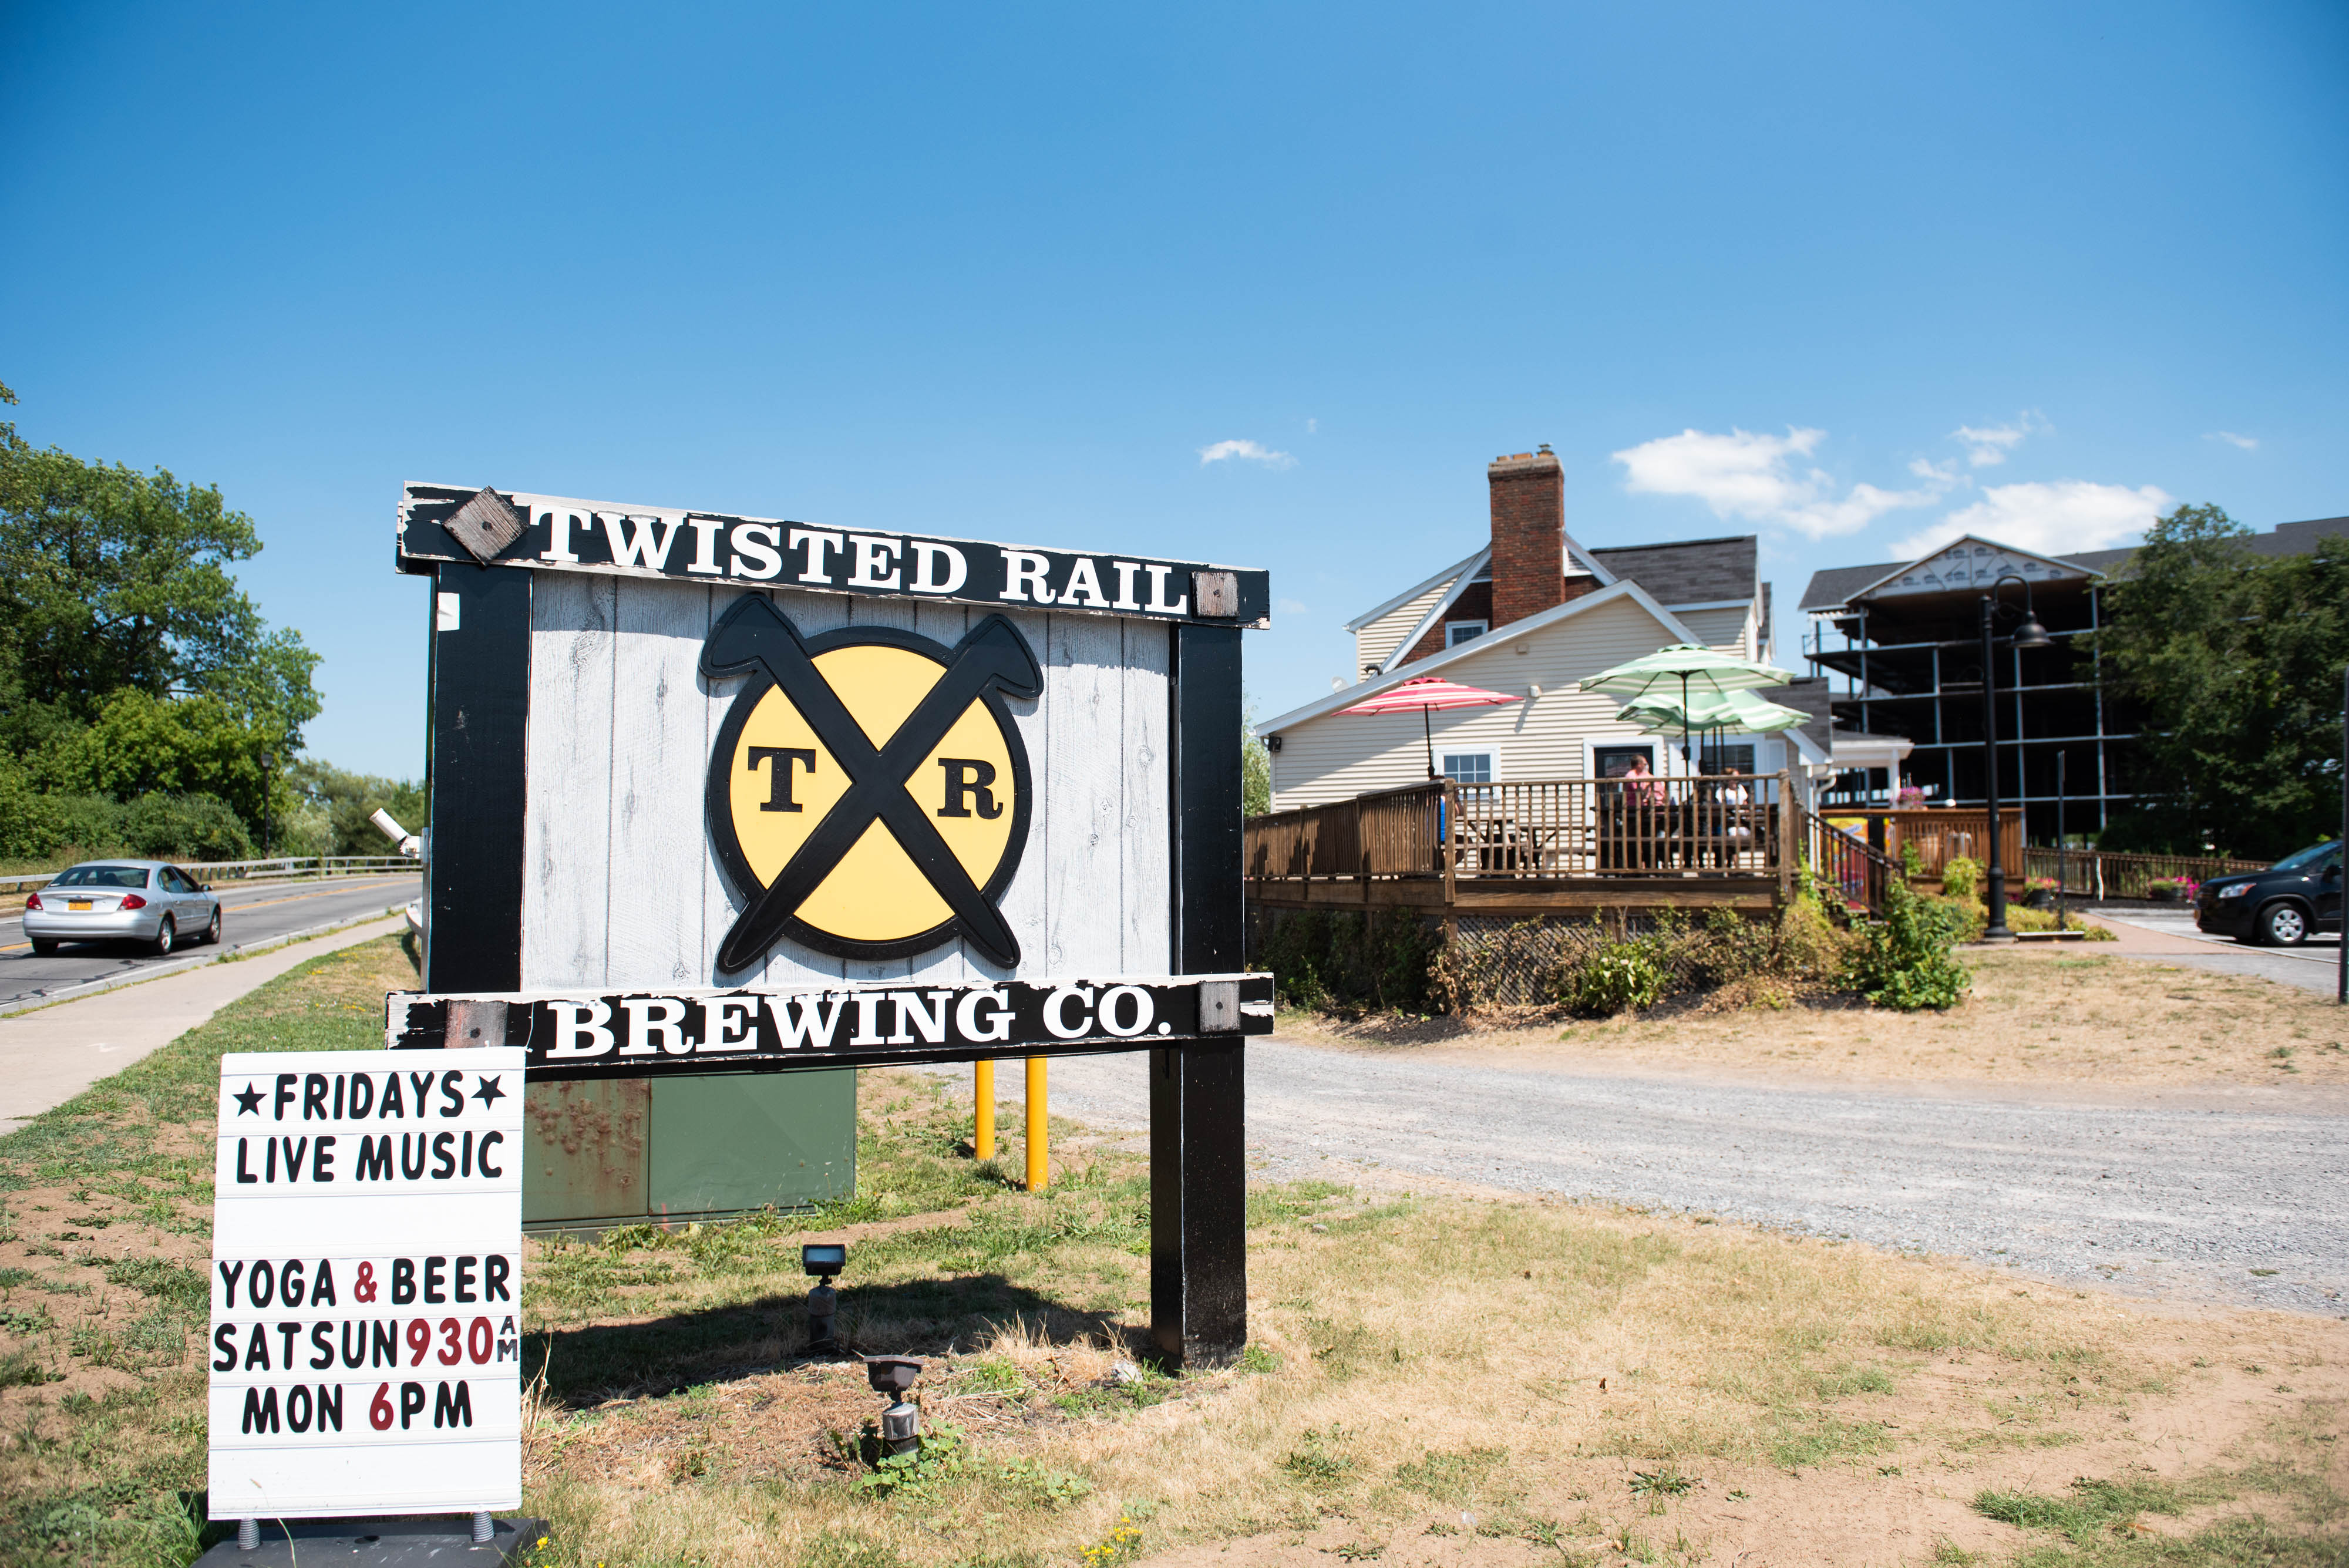 Twisted Rail Brewing, City of Canandaigua look for solutions on noise complaints: Live music paused temporarily